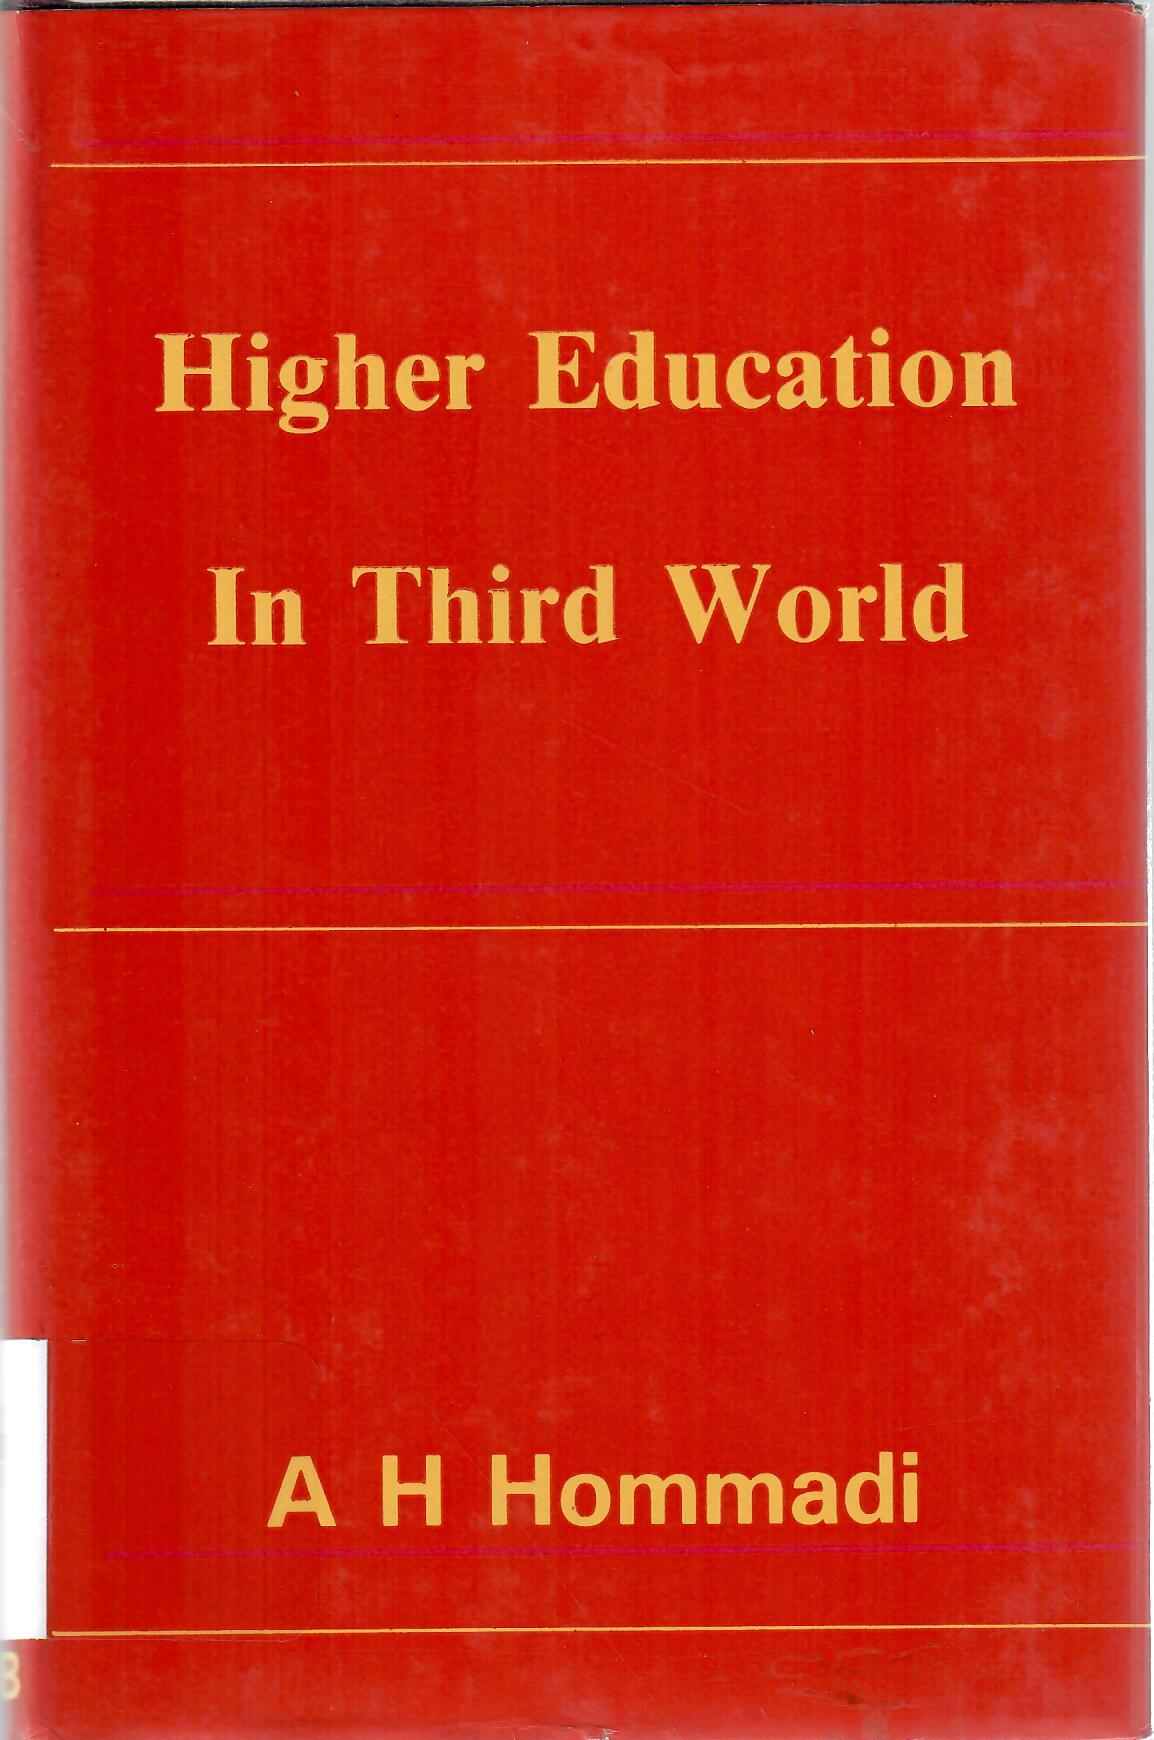 Higher Education In Third World